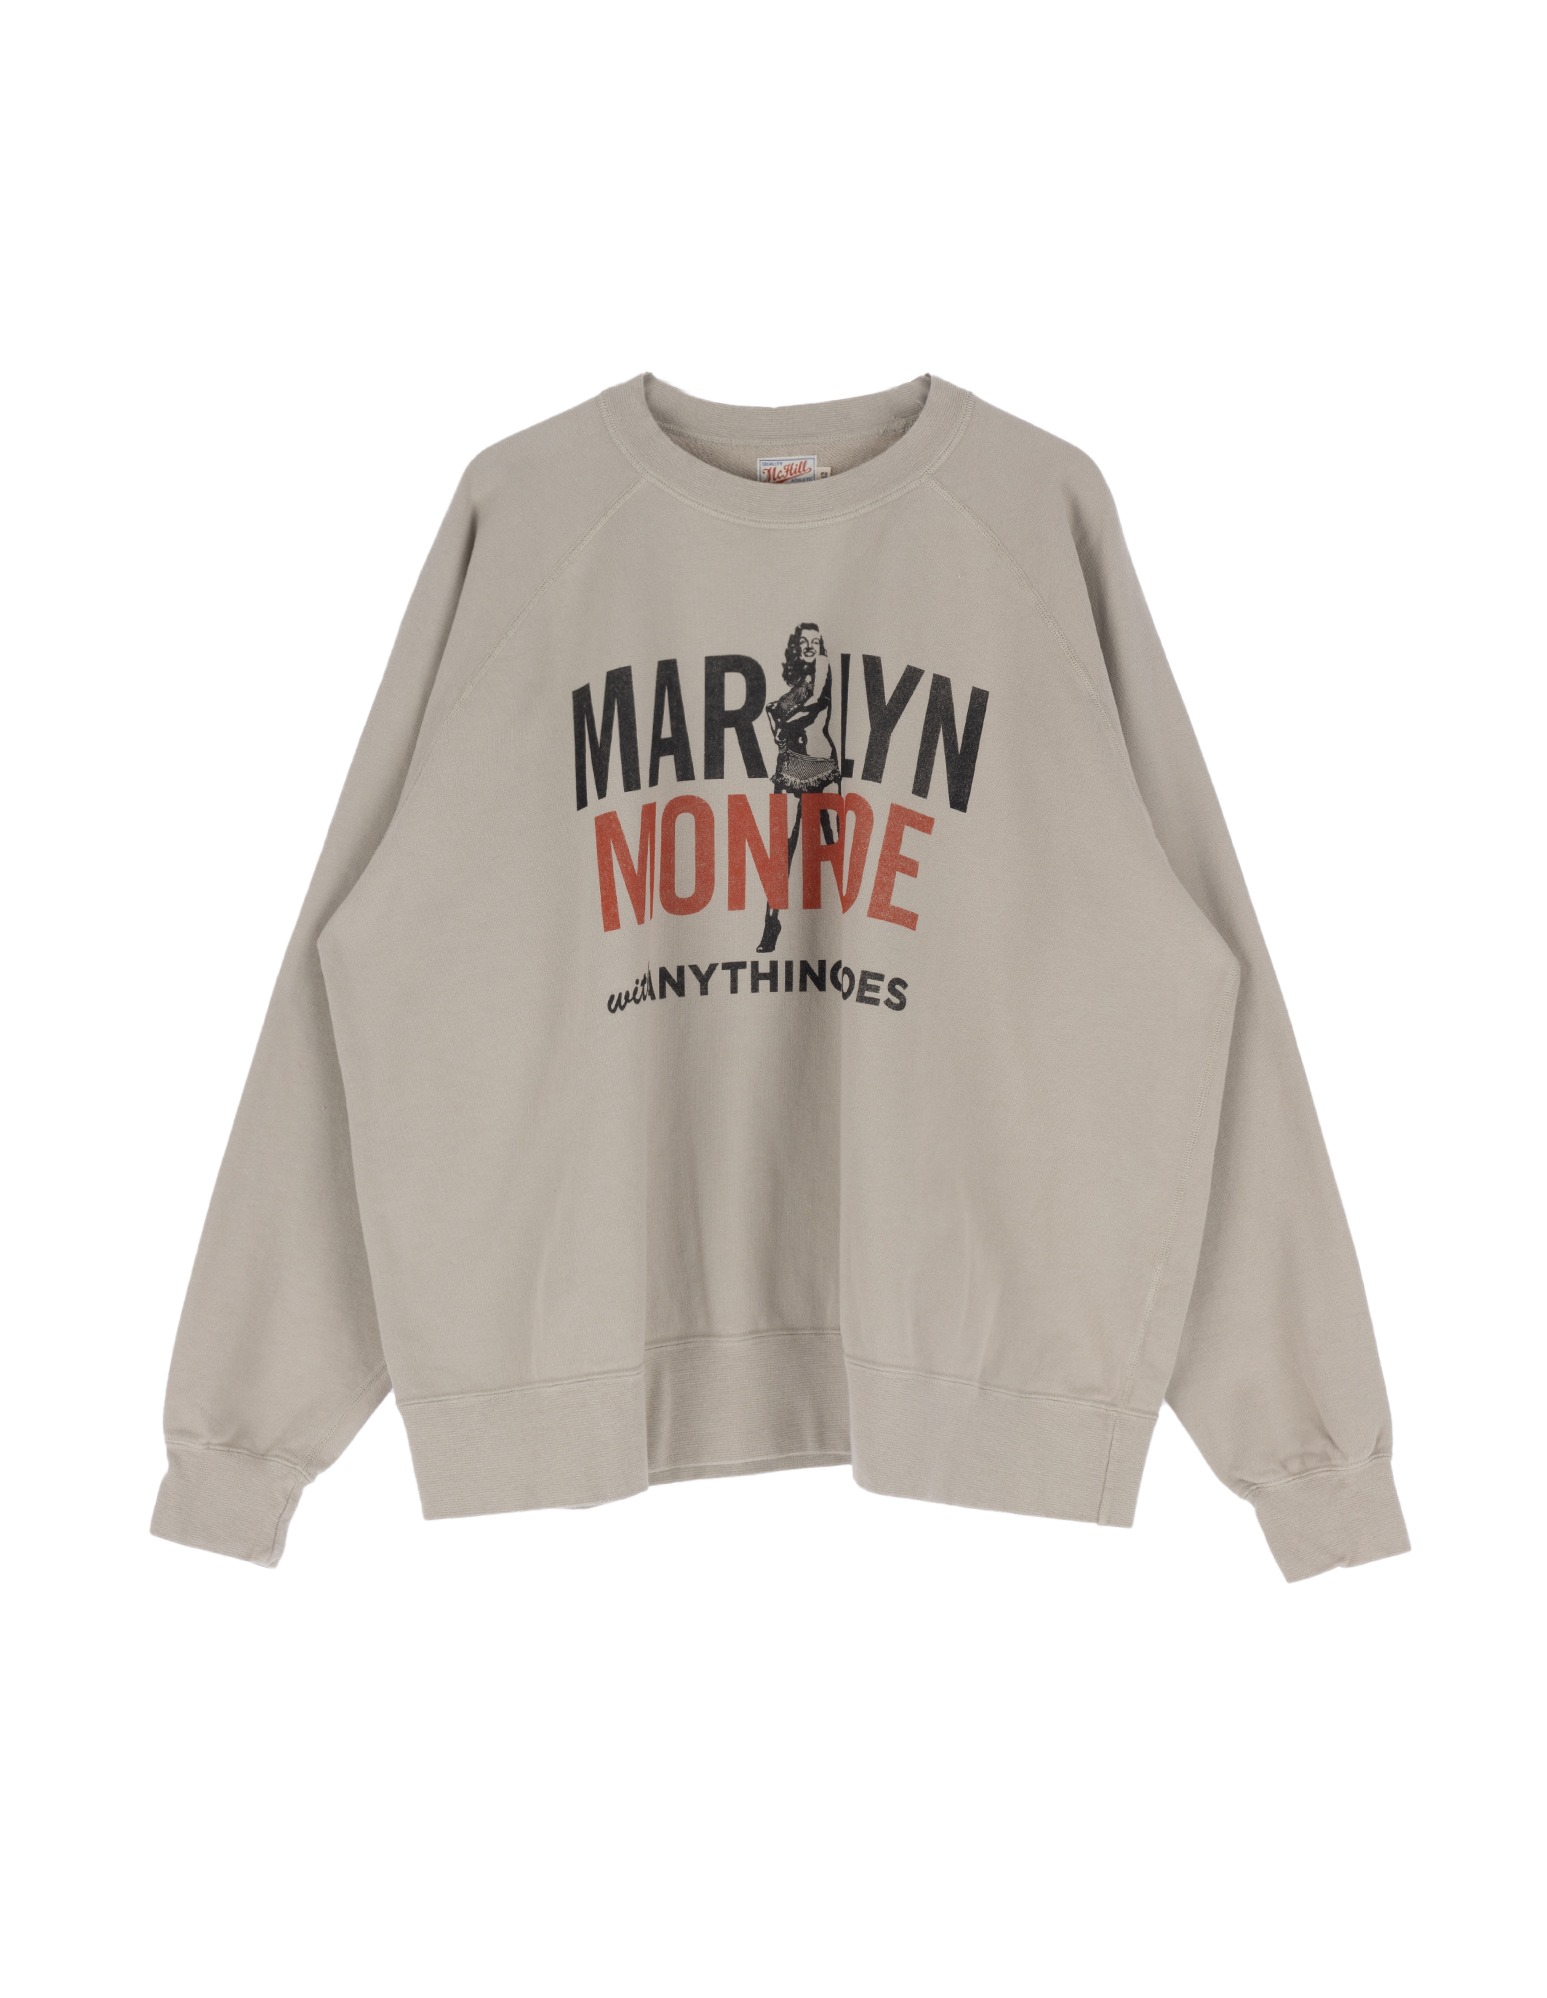 TMC2358 SWEAT SHIRT MARILYN MONROE &quot;ANYTHING GOES&quot; (Sand)